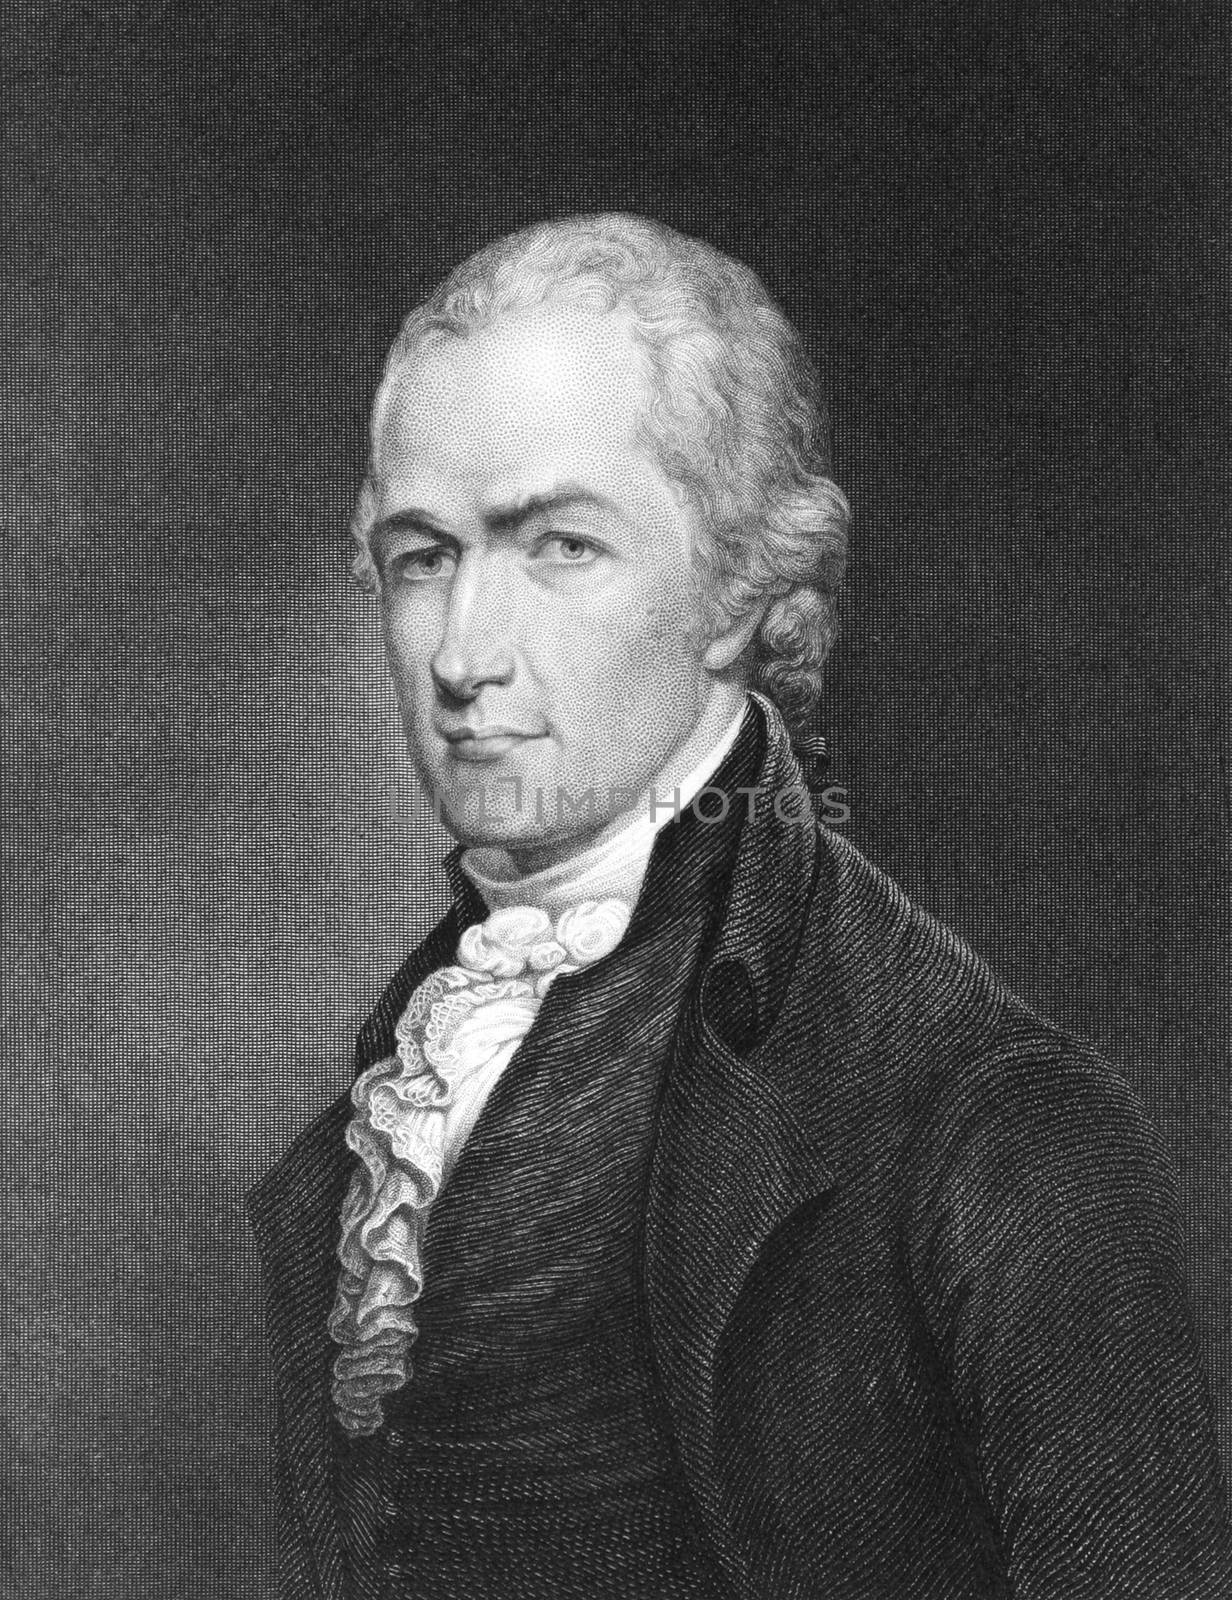 Alexander Hamilton (1755-1804) on engraving from 1835. Founding father of the United States. Engraved by E.Prudhomme and published in ''National Portrait Gallery of Distinguished Americans Volume II'',USA,1835.